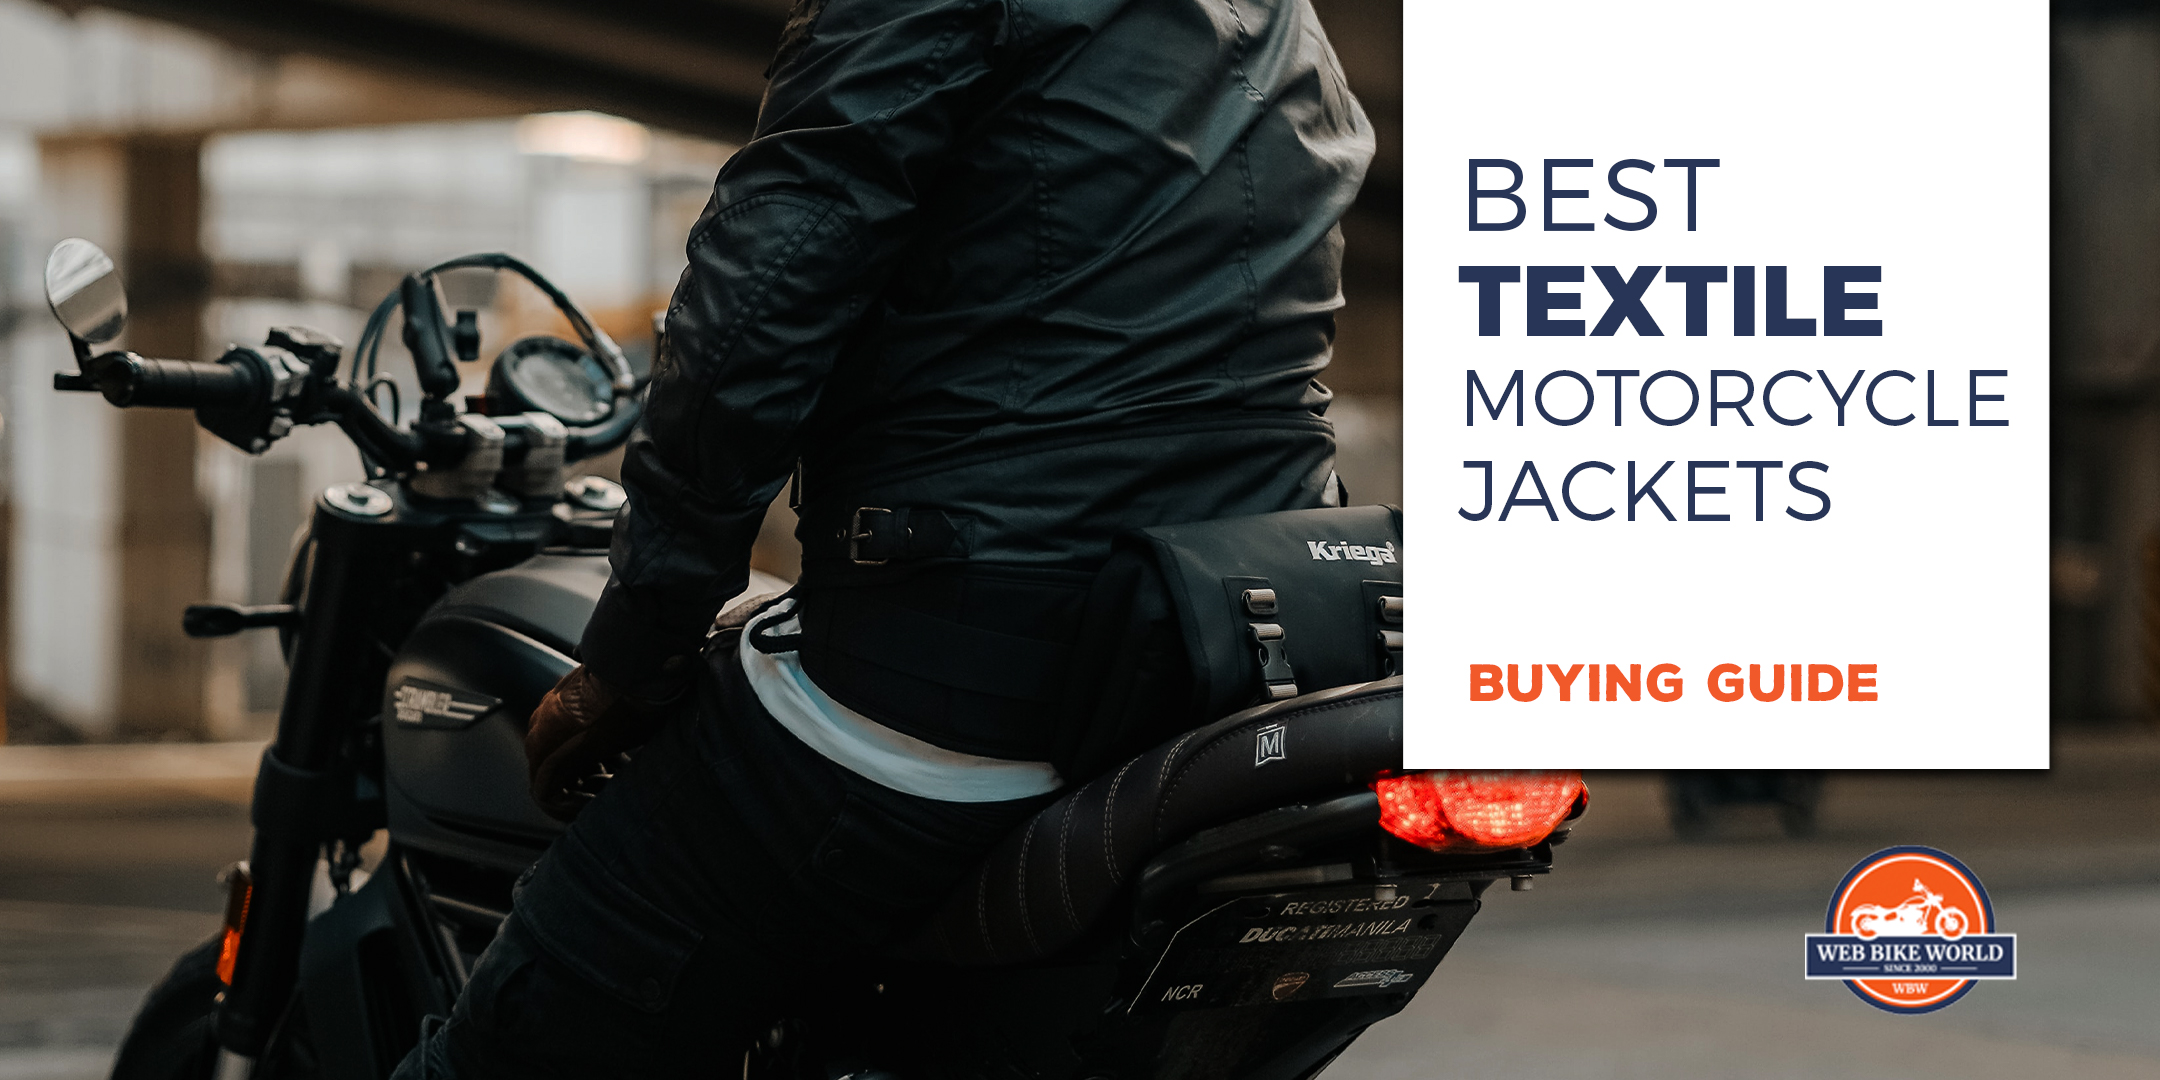 Best Textile Motorcycle Jackets | Motorcycle.com